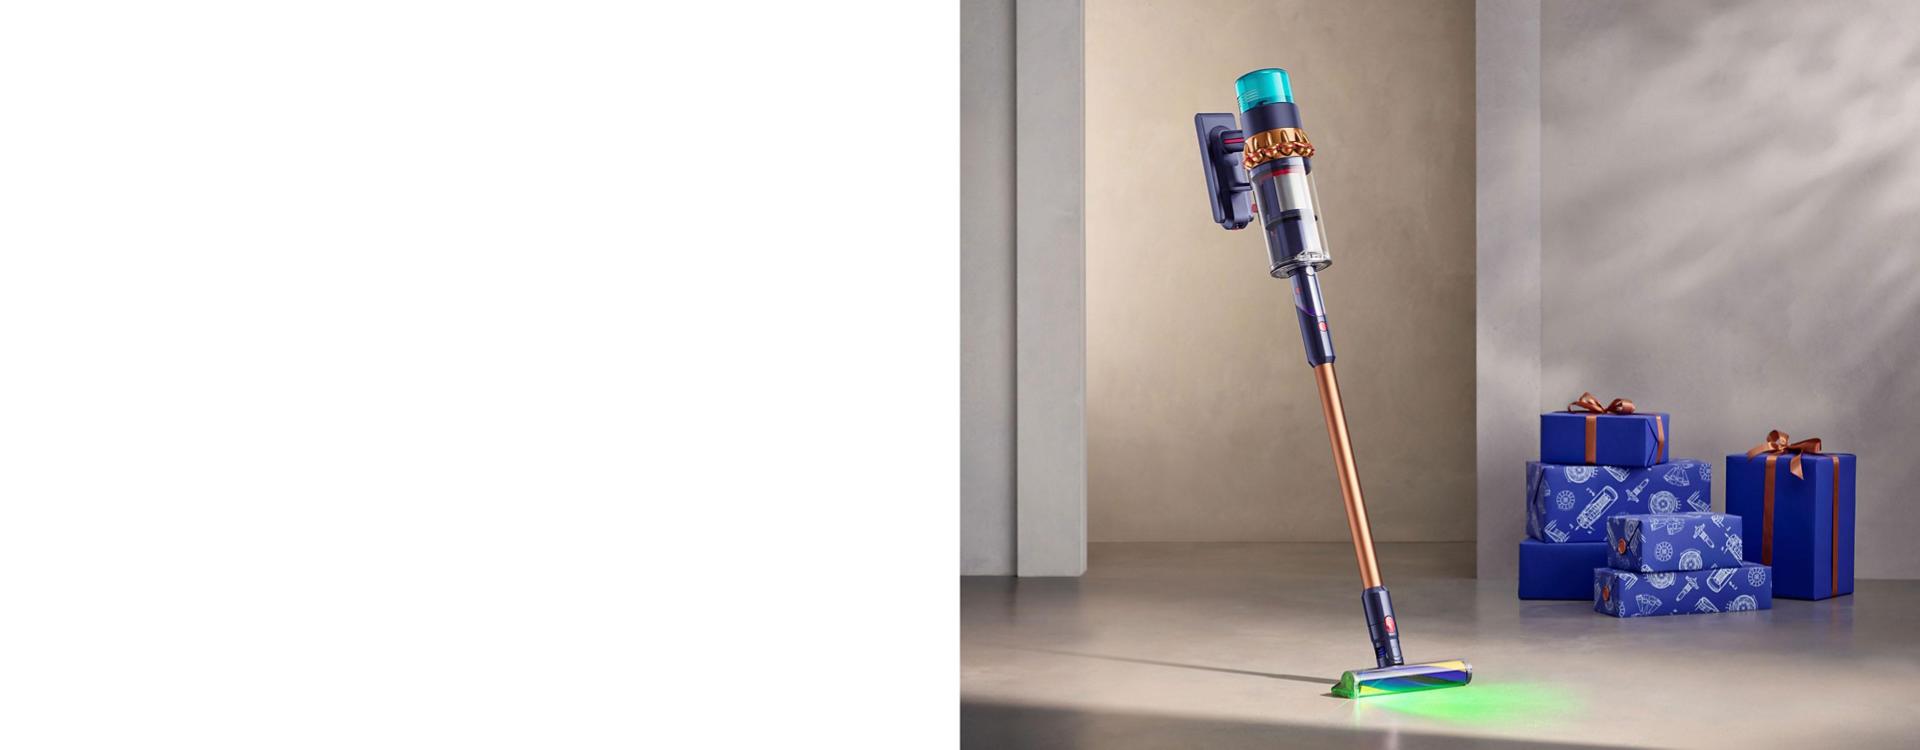 Dyson Gen5detect vacuum in Prussian blue and rich copper